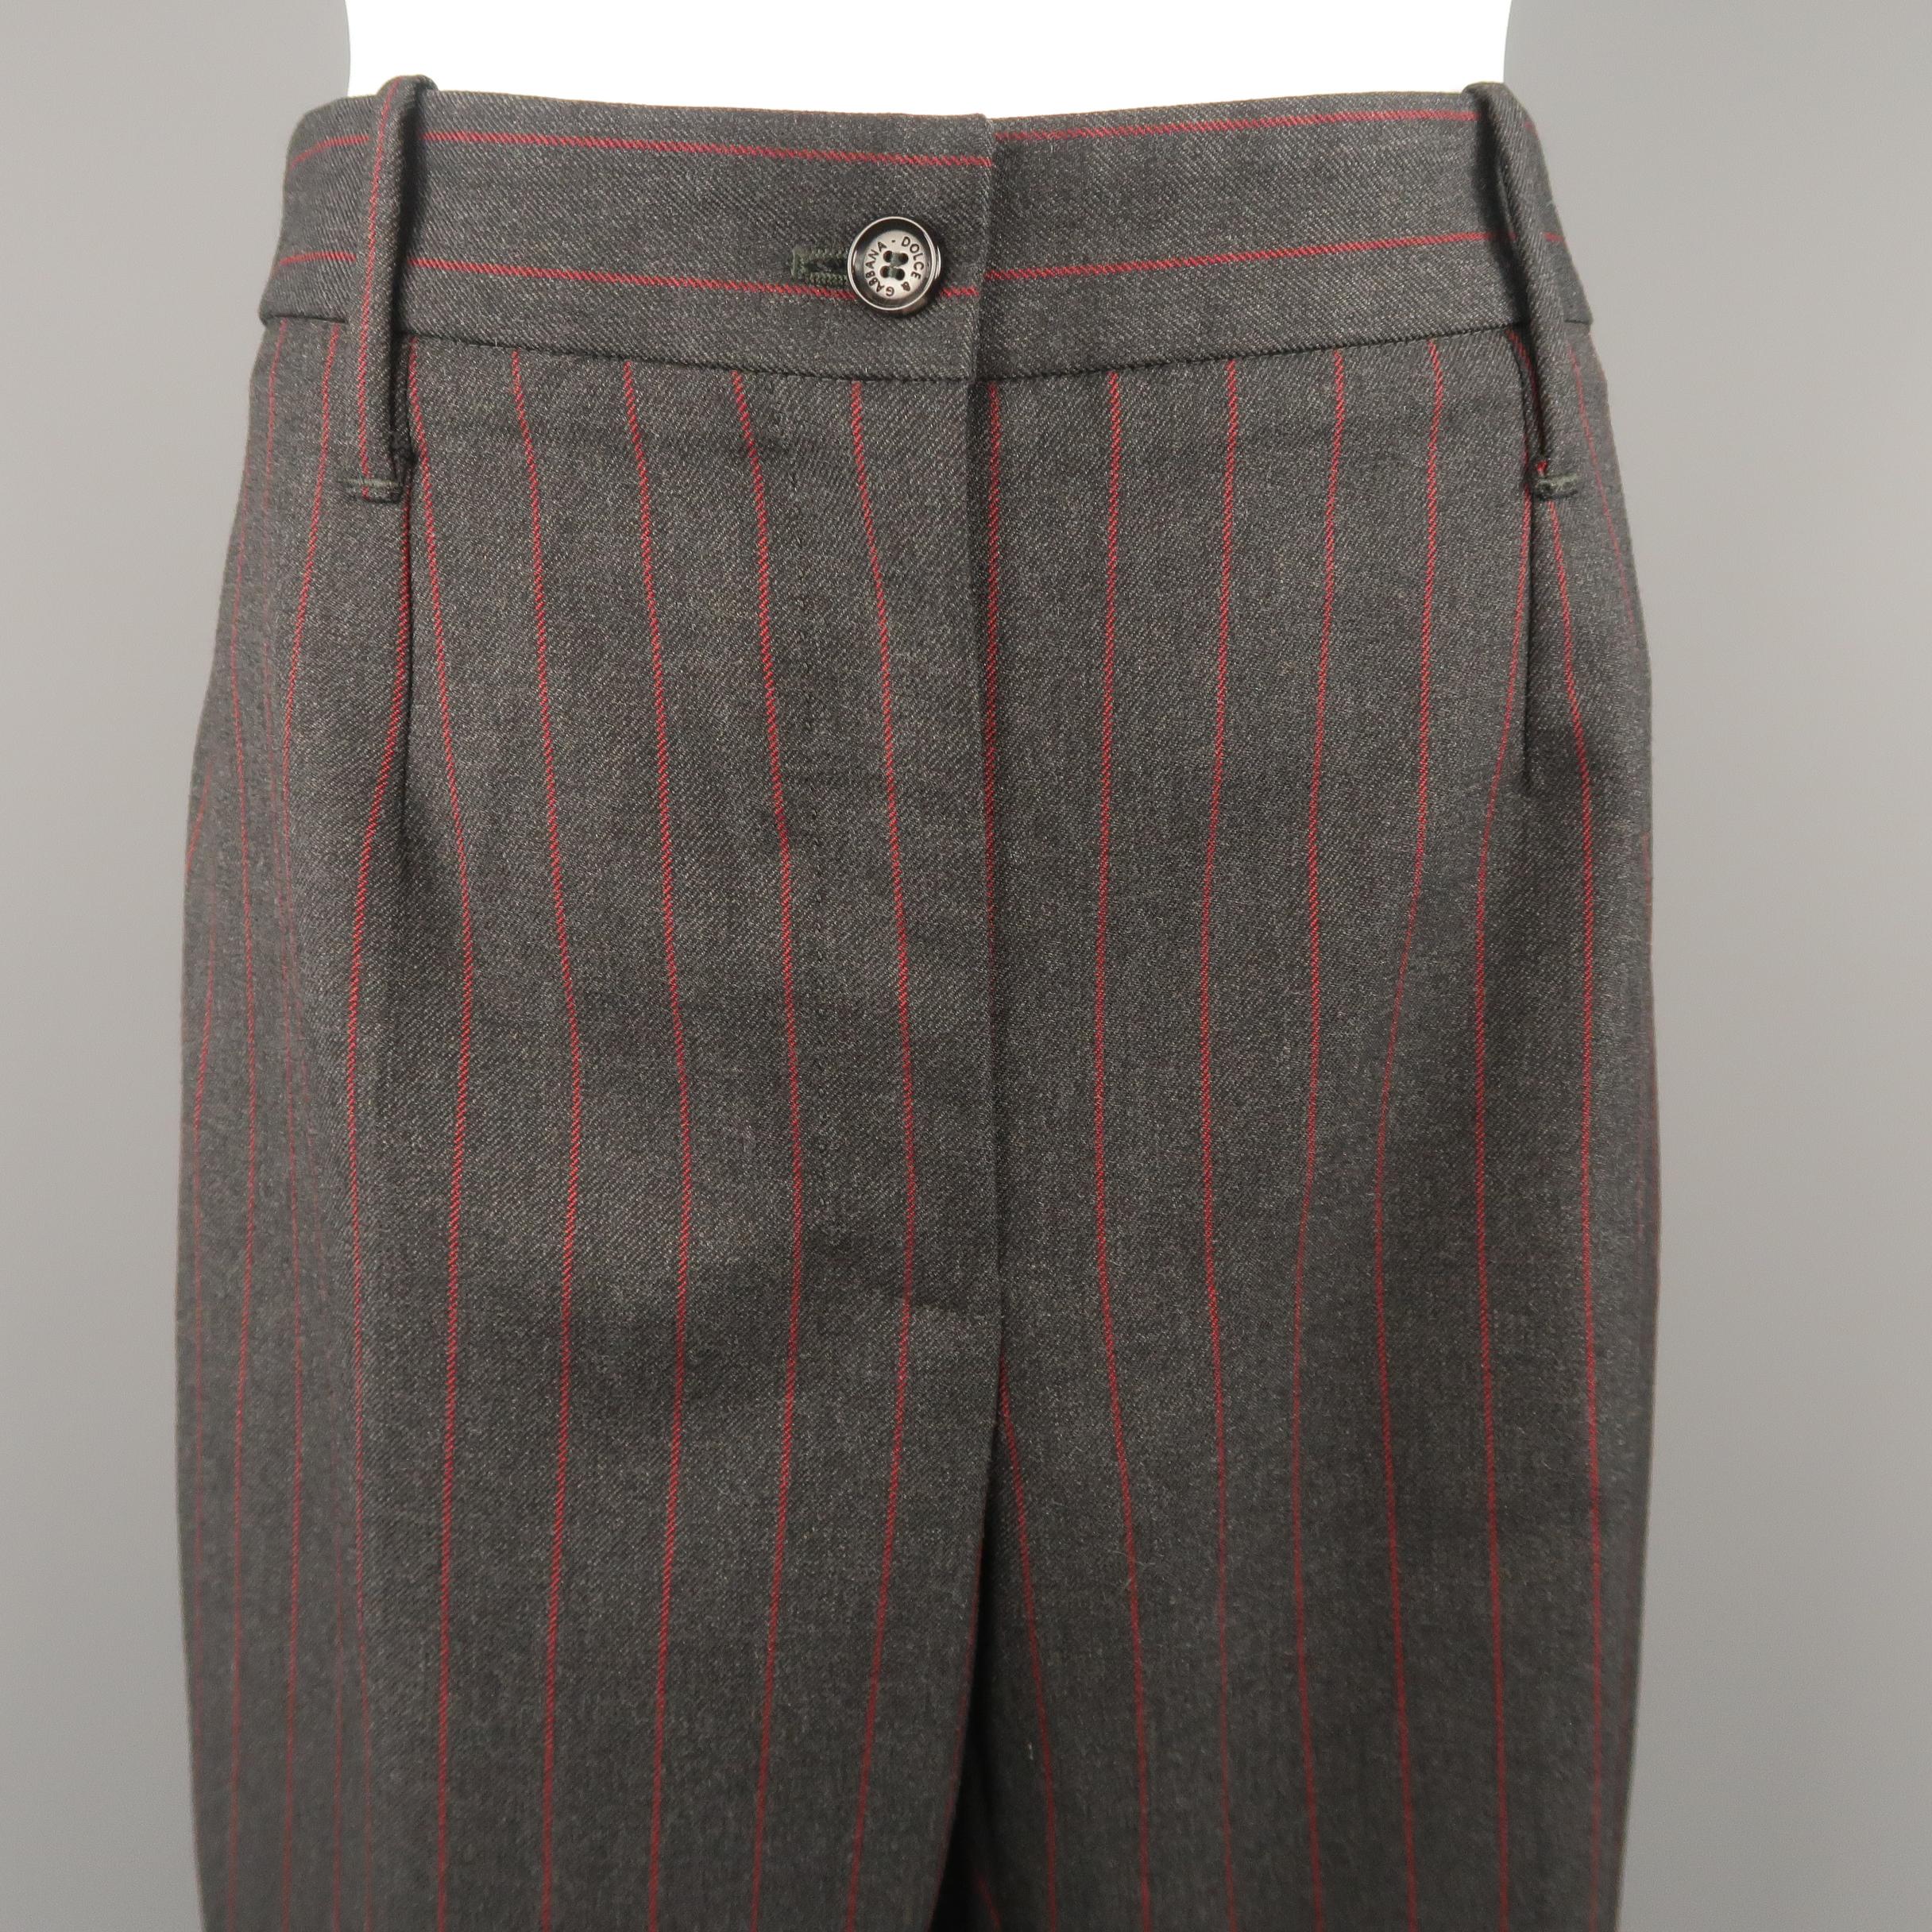 DOLCE & GABBANA dress pants come in charcoal wool twill with red chalk stripe pattern throughout and darted flat front, wide leg with oversized cuff, cropped hem. Made in Italy.
 
Excellent Pre-Owned Condition.
Marked: IT 42
 
Measurements:
 
Waist: